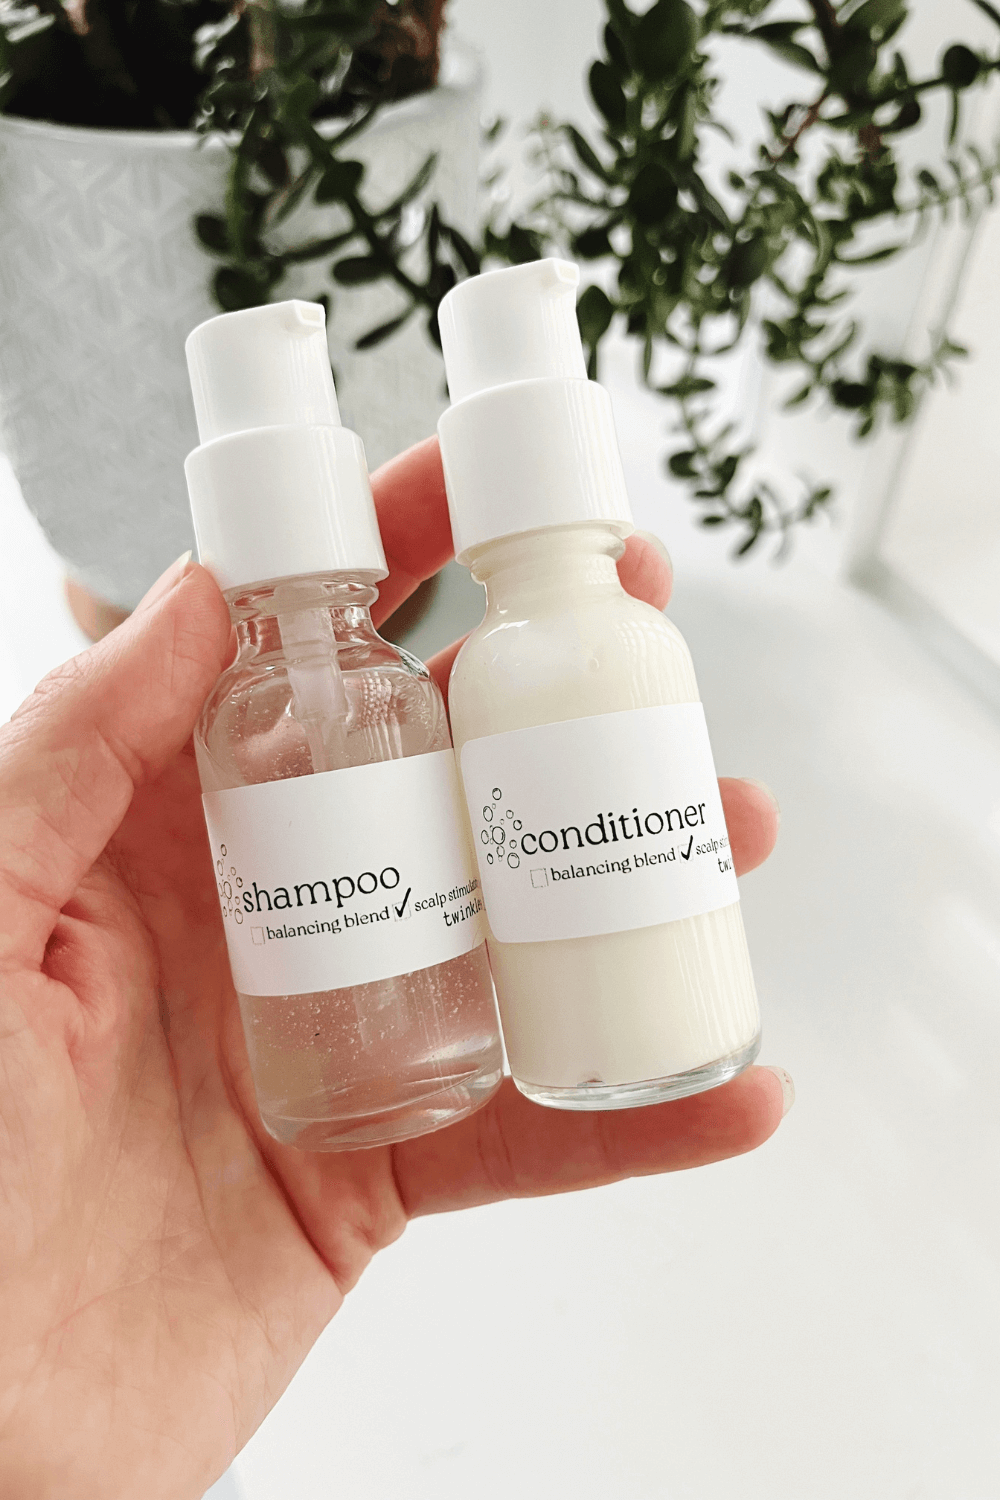 1 oz trial size bottles of twinkle apothecary shampoo and conditioner 